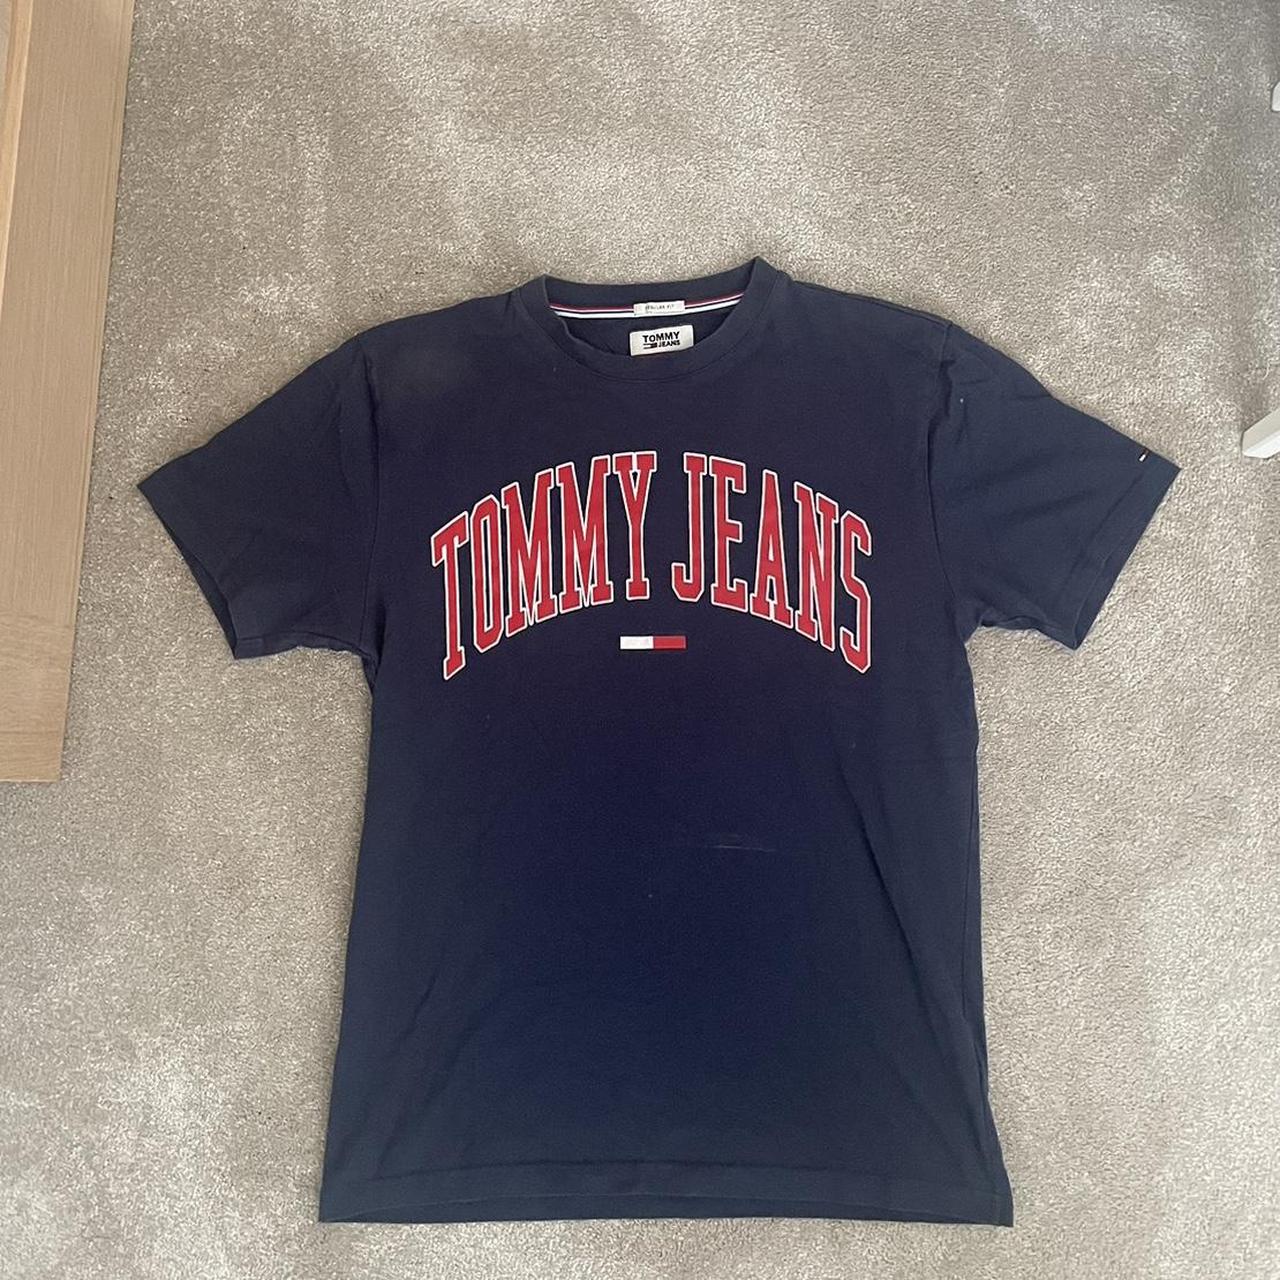 Tommy Jeans tshirt - Depop